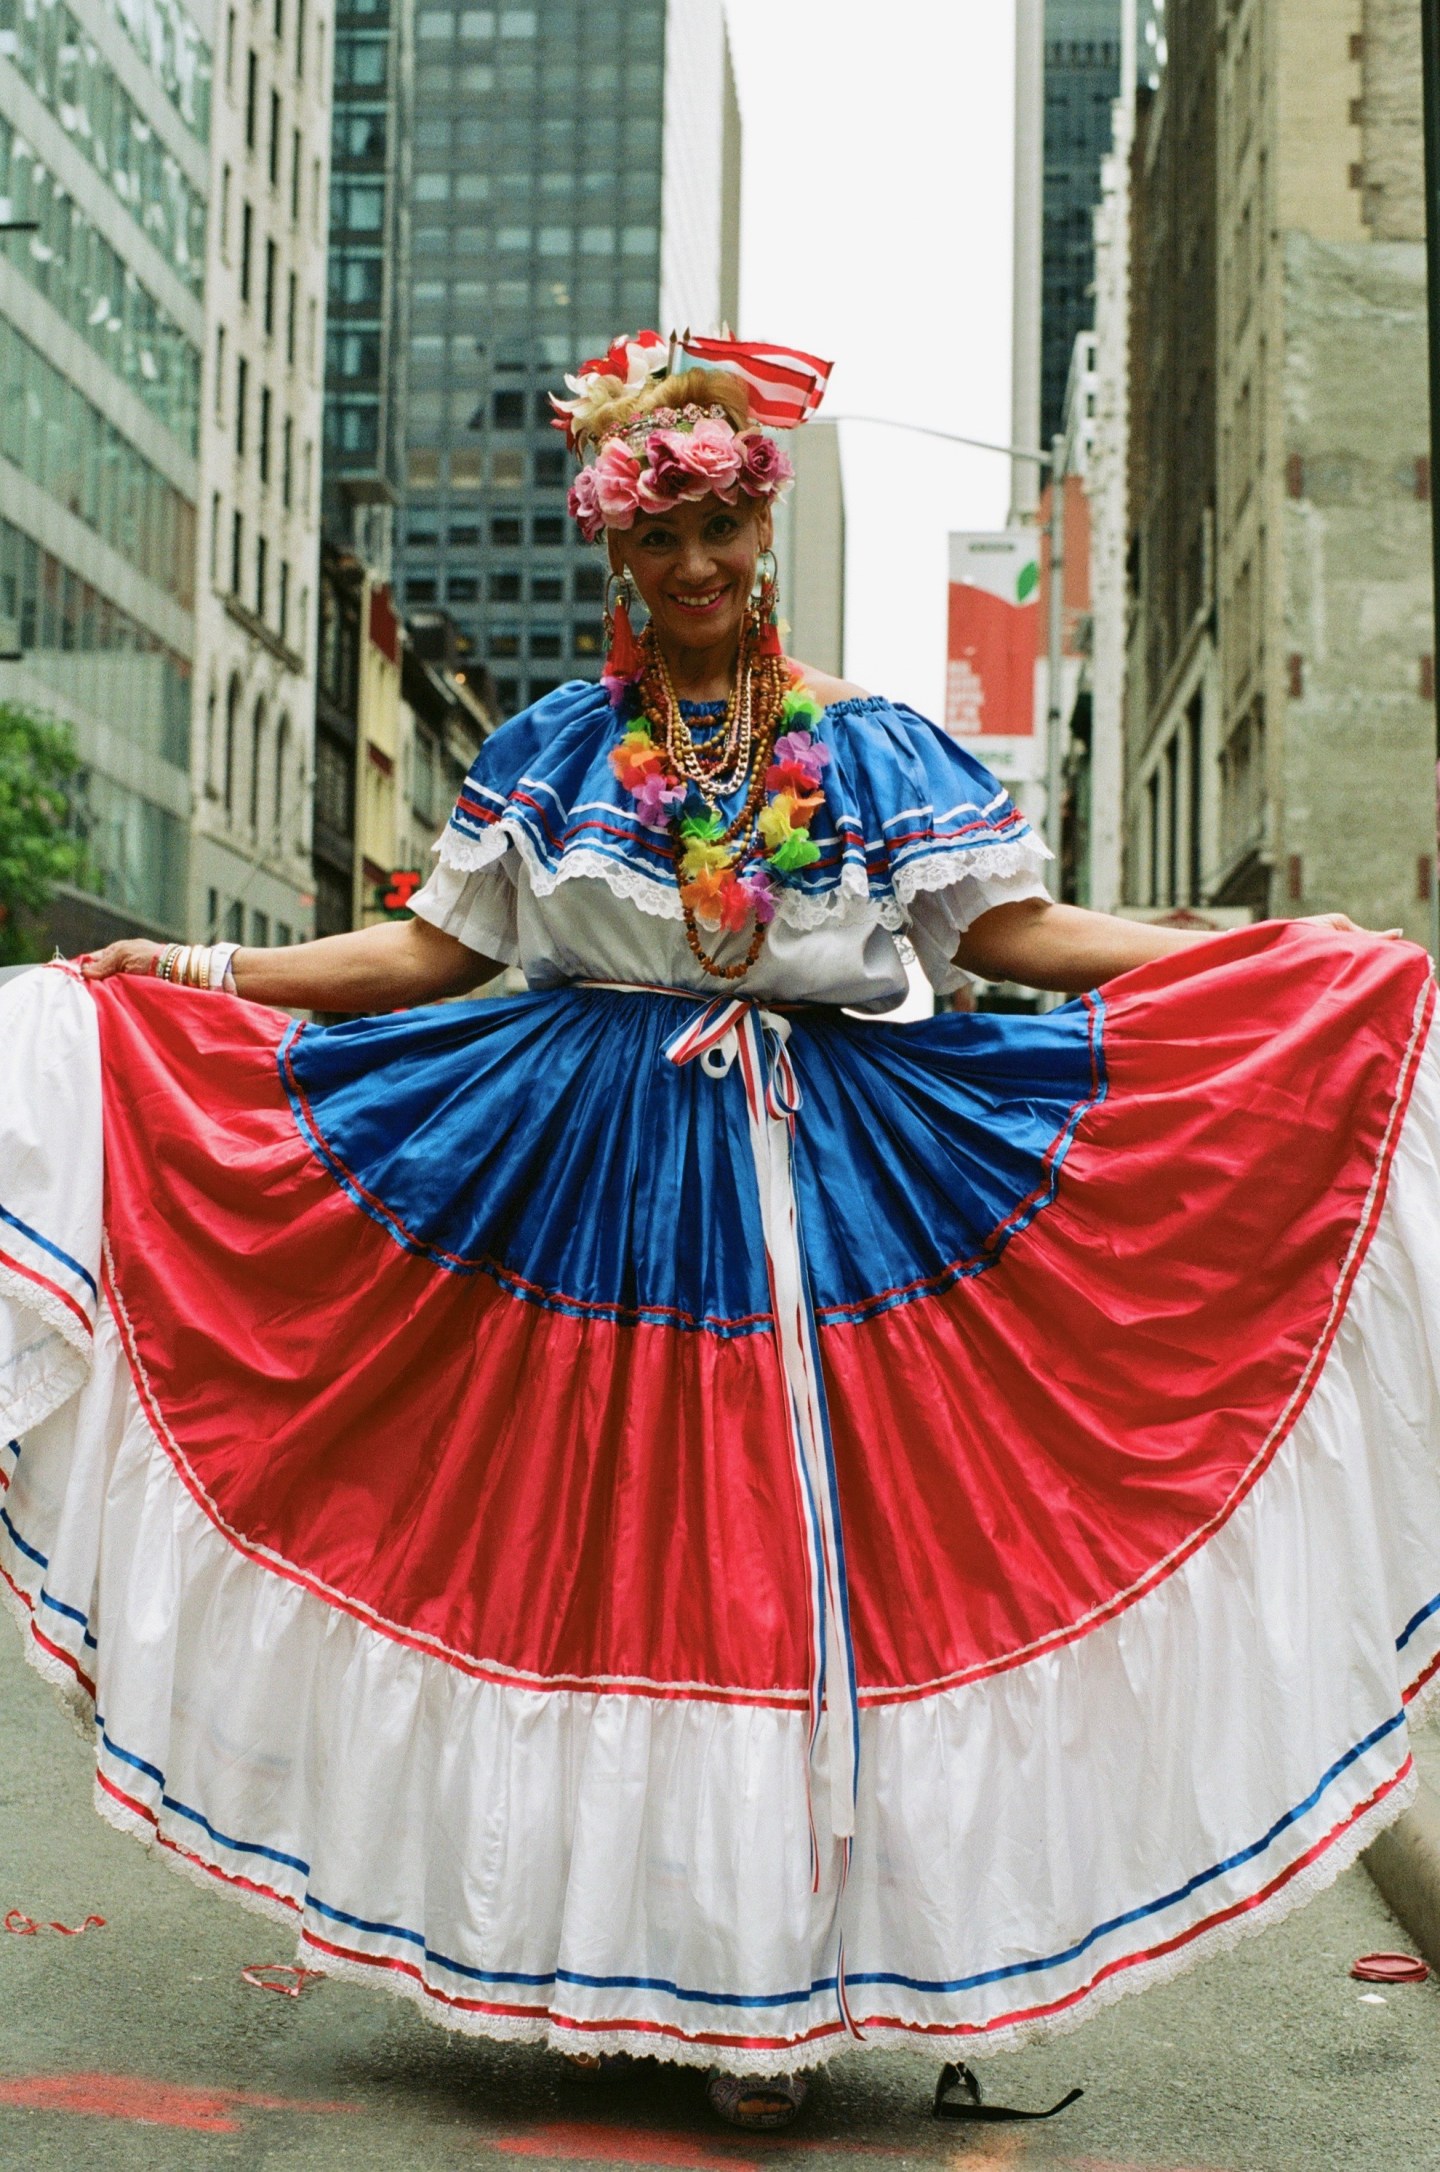 Every outfit at the Puerto Rican Day Parade was a love letter to the island